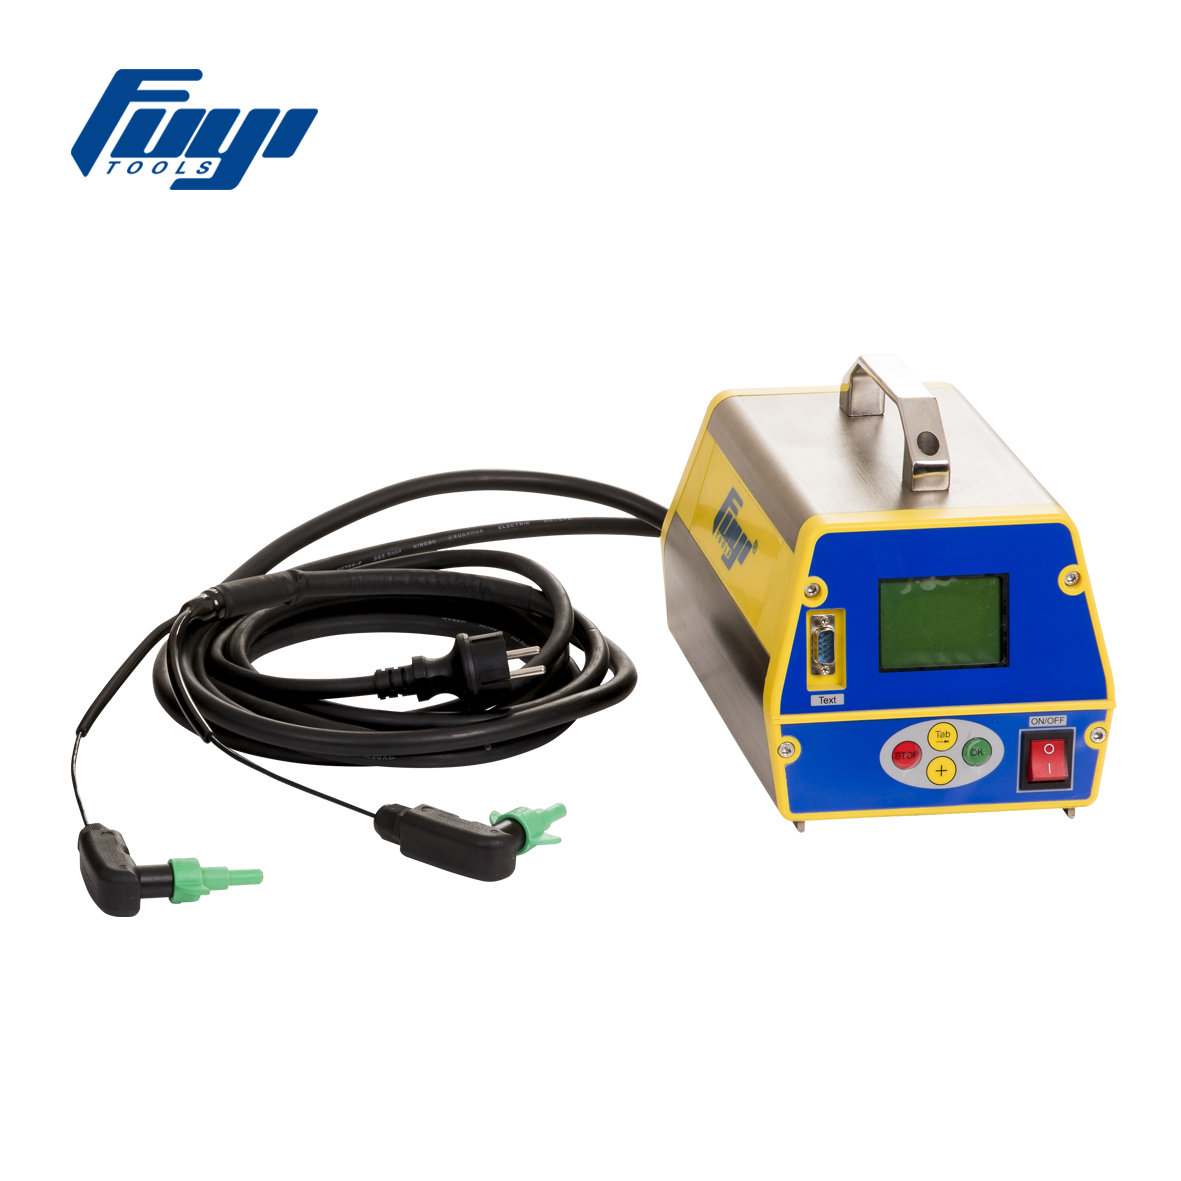 160 mm PPR Electrofusion Welding Machine Featured Image